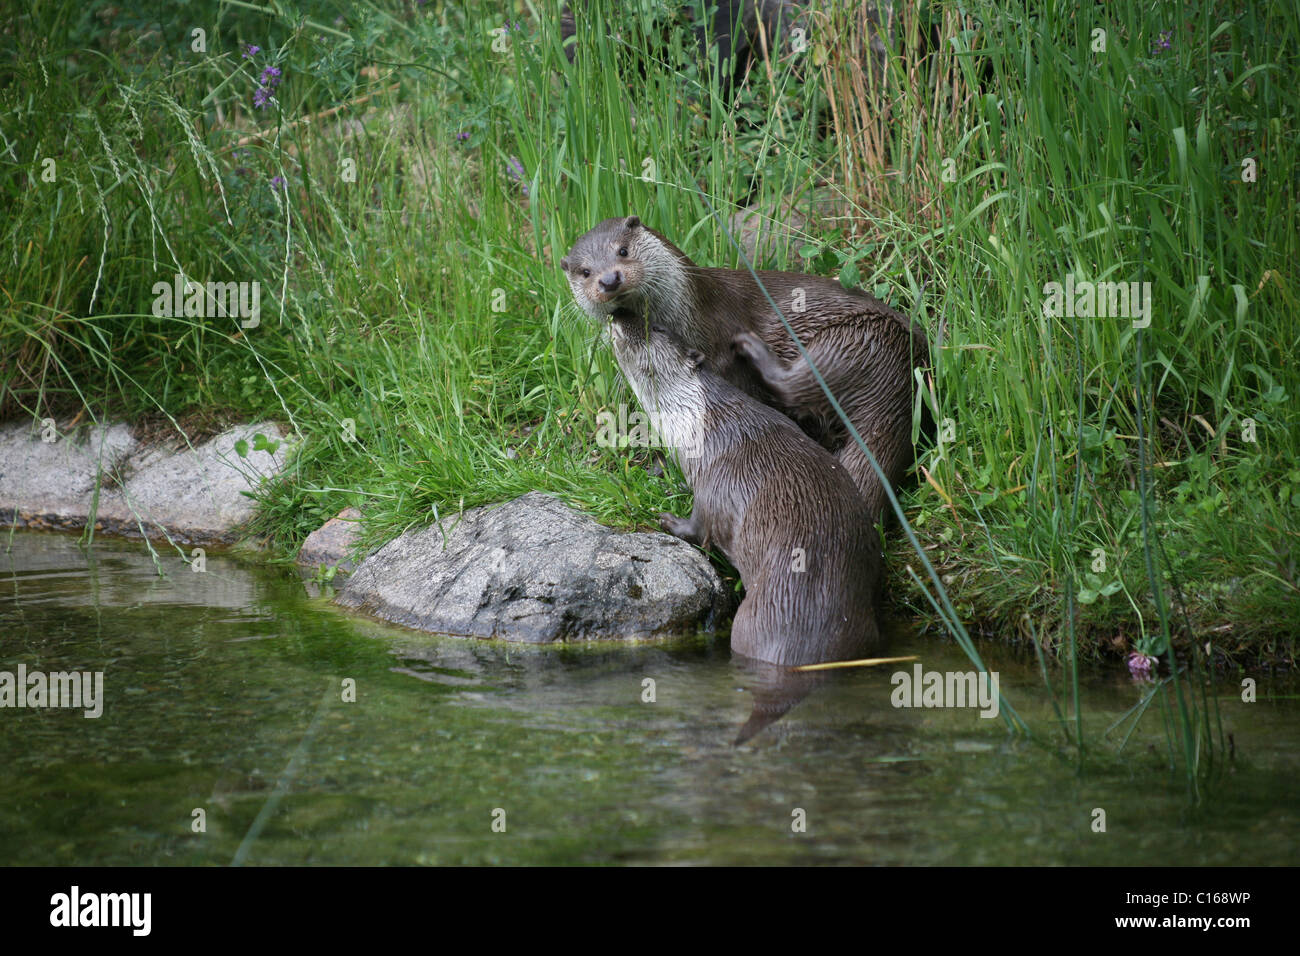 Eurasian Otter or Common Otter (Lutra lutra) by a stream Stock Photo